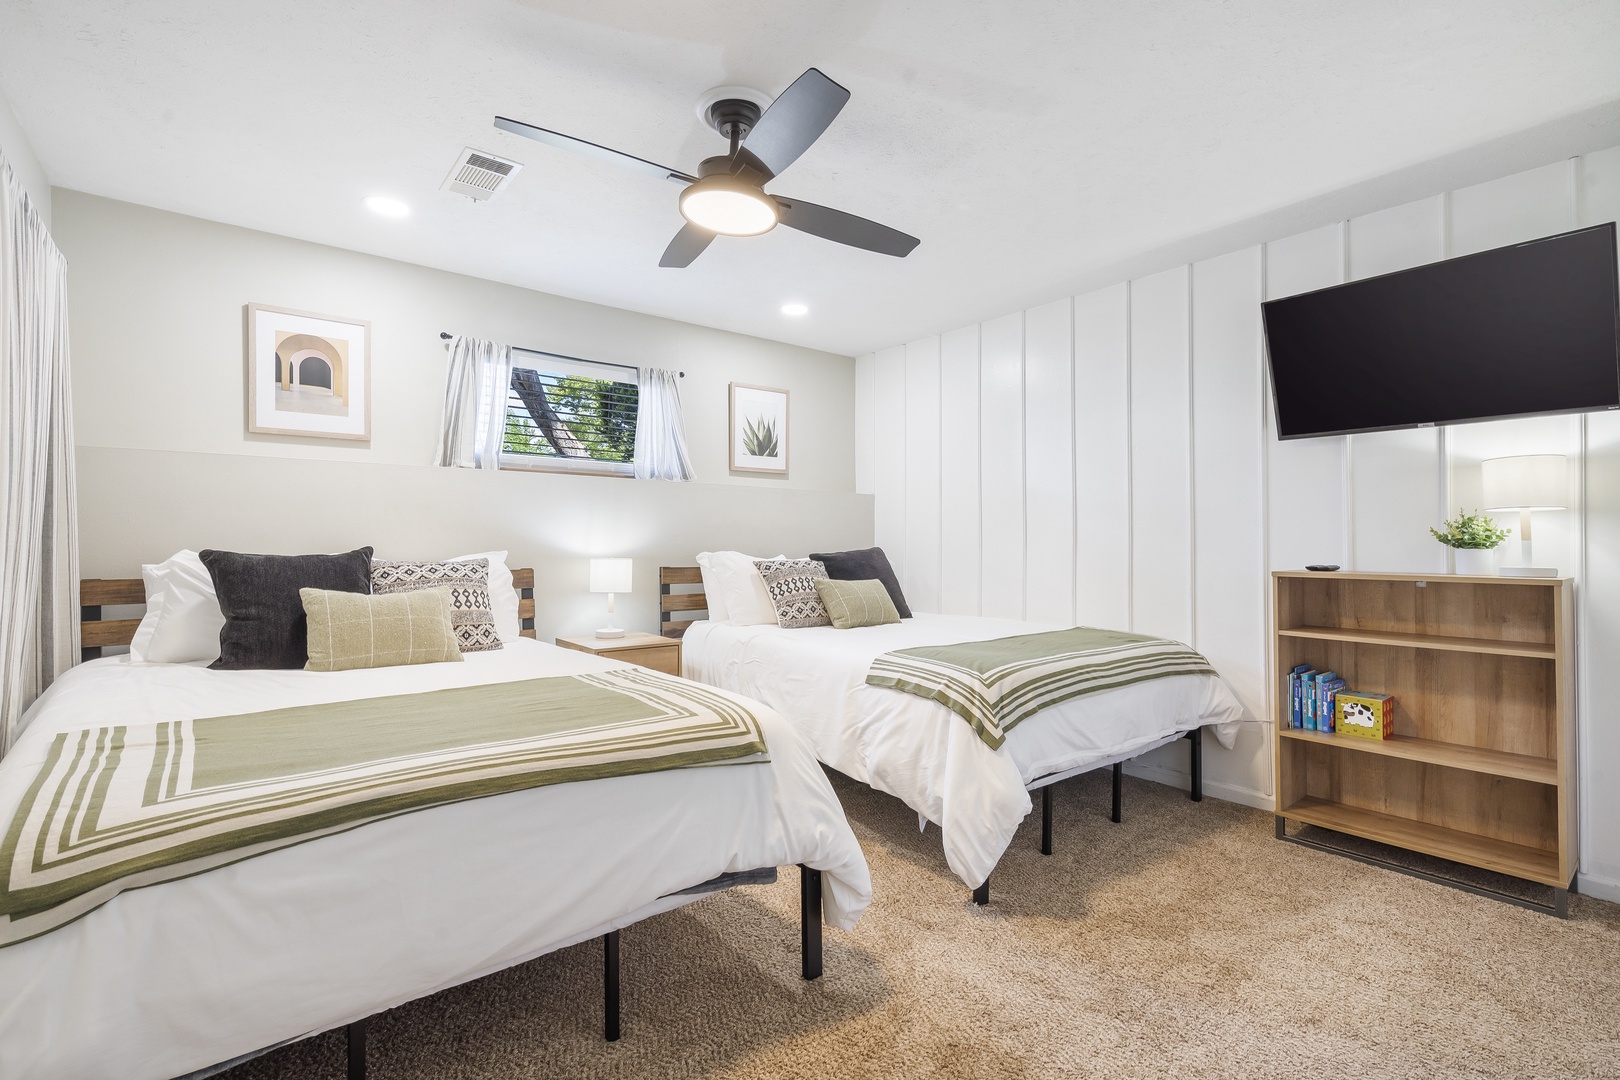 The first bedroom sanctuary offers a pair of cozy queen beds & Smart TV